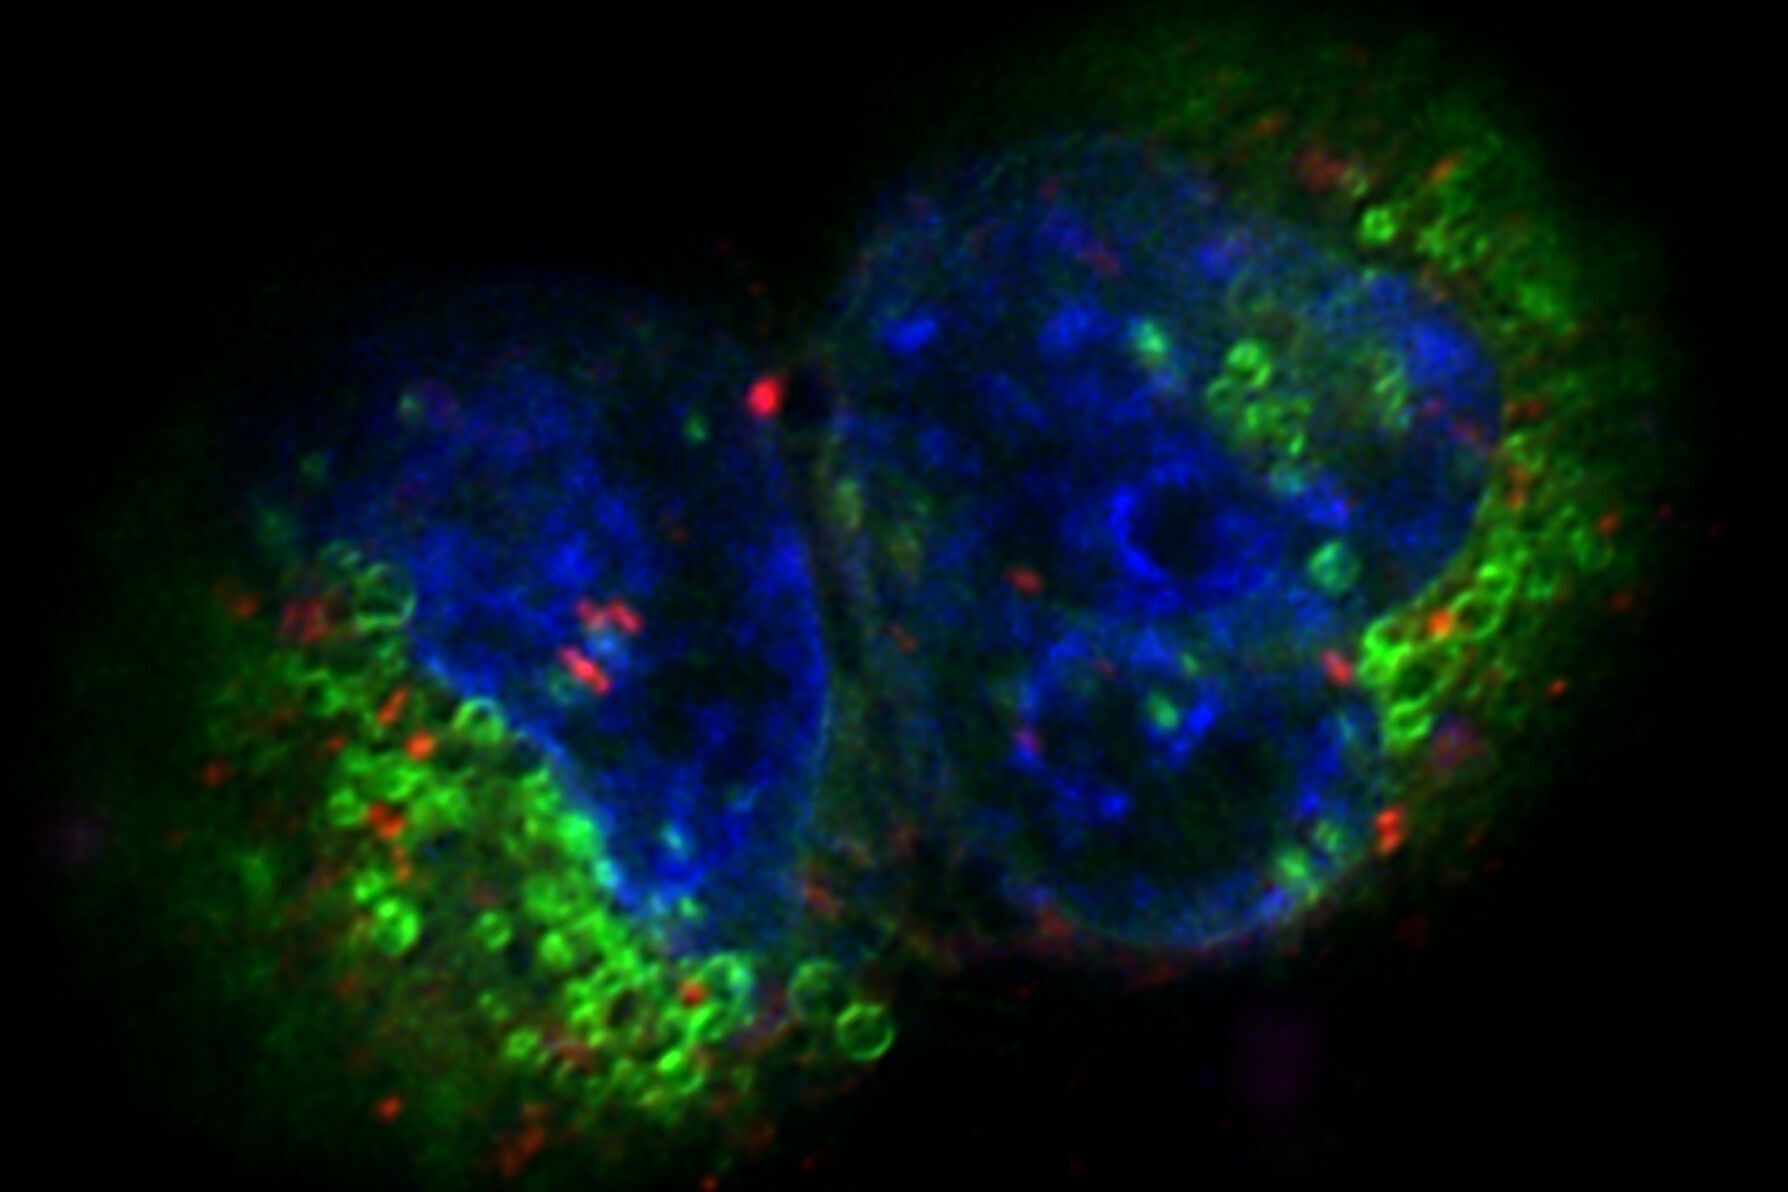 [Translate to chinese:] Projection of a confocal z-stack. Sum159 cells, human breast cancer cells kindly provided by Ievgeniia Zagoriy, Mahamid Group, EMBL Heidelberg, Germany. Blue–Hoechst - indicates nuclei, Green–MitoTracker Green–mitochondria, and red–Bodipy - lipid droplets